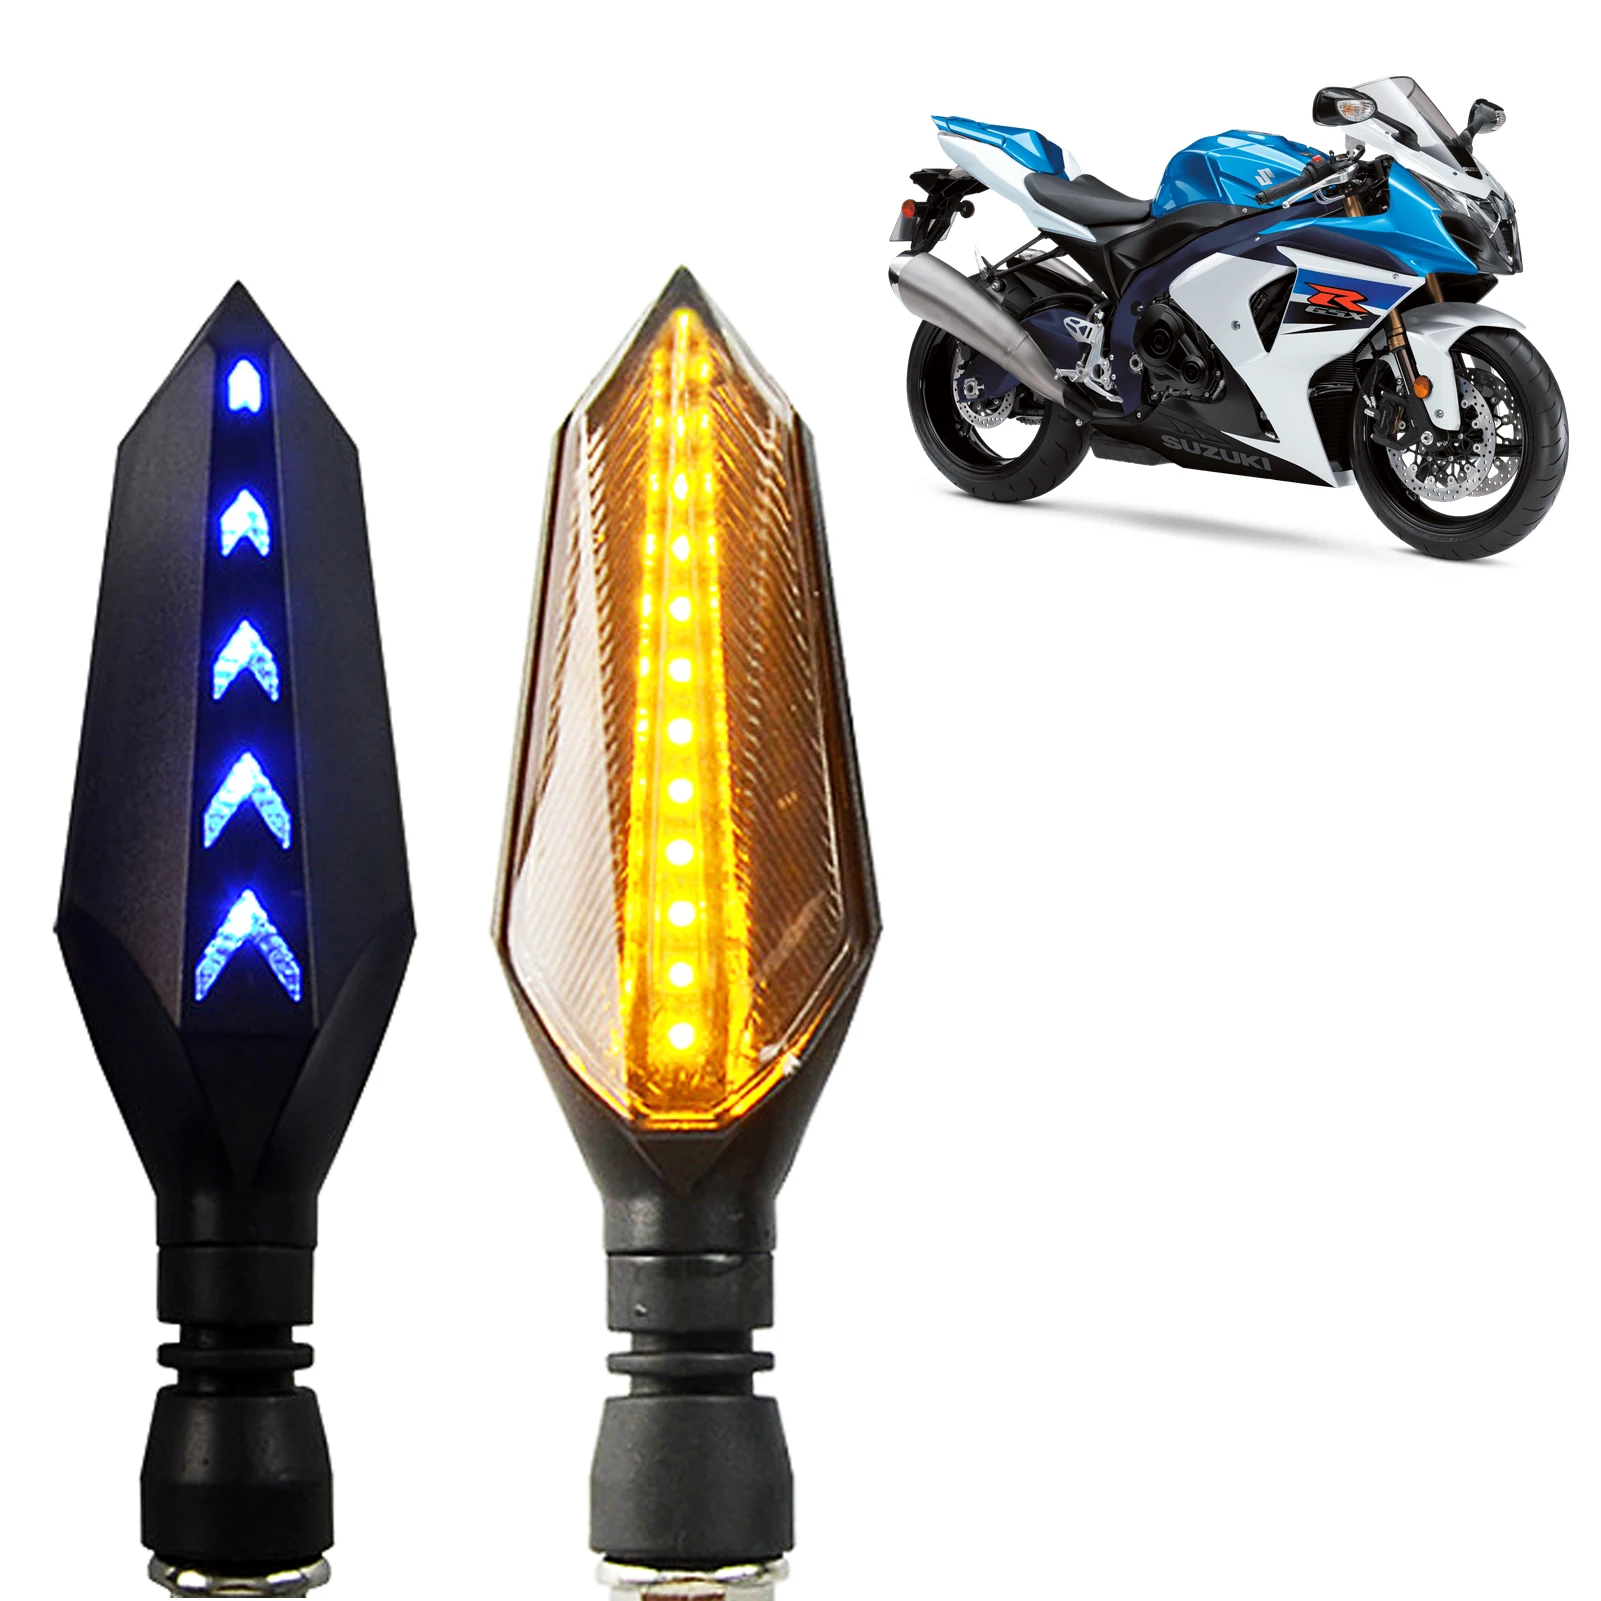 

Motorcycle Turn Signals Double-Sided Flowing LED Light For Motorcycle Motorbike Scooter Rear Turning Signal Lights Motorcycle